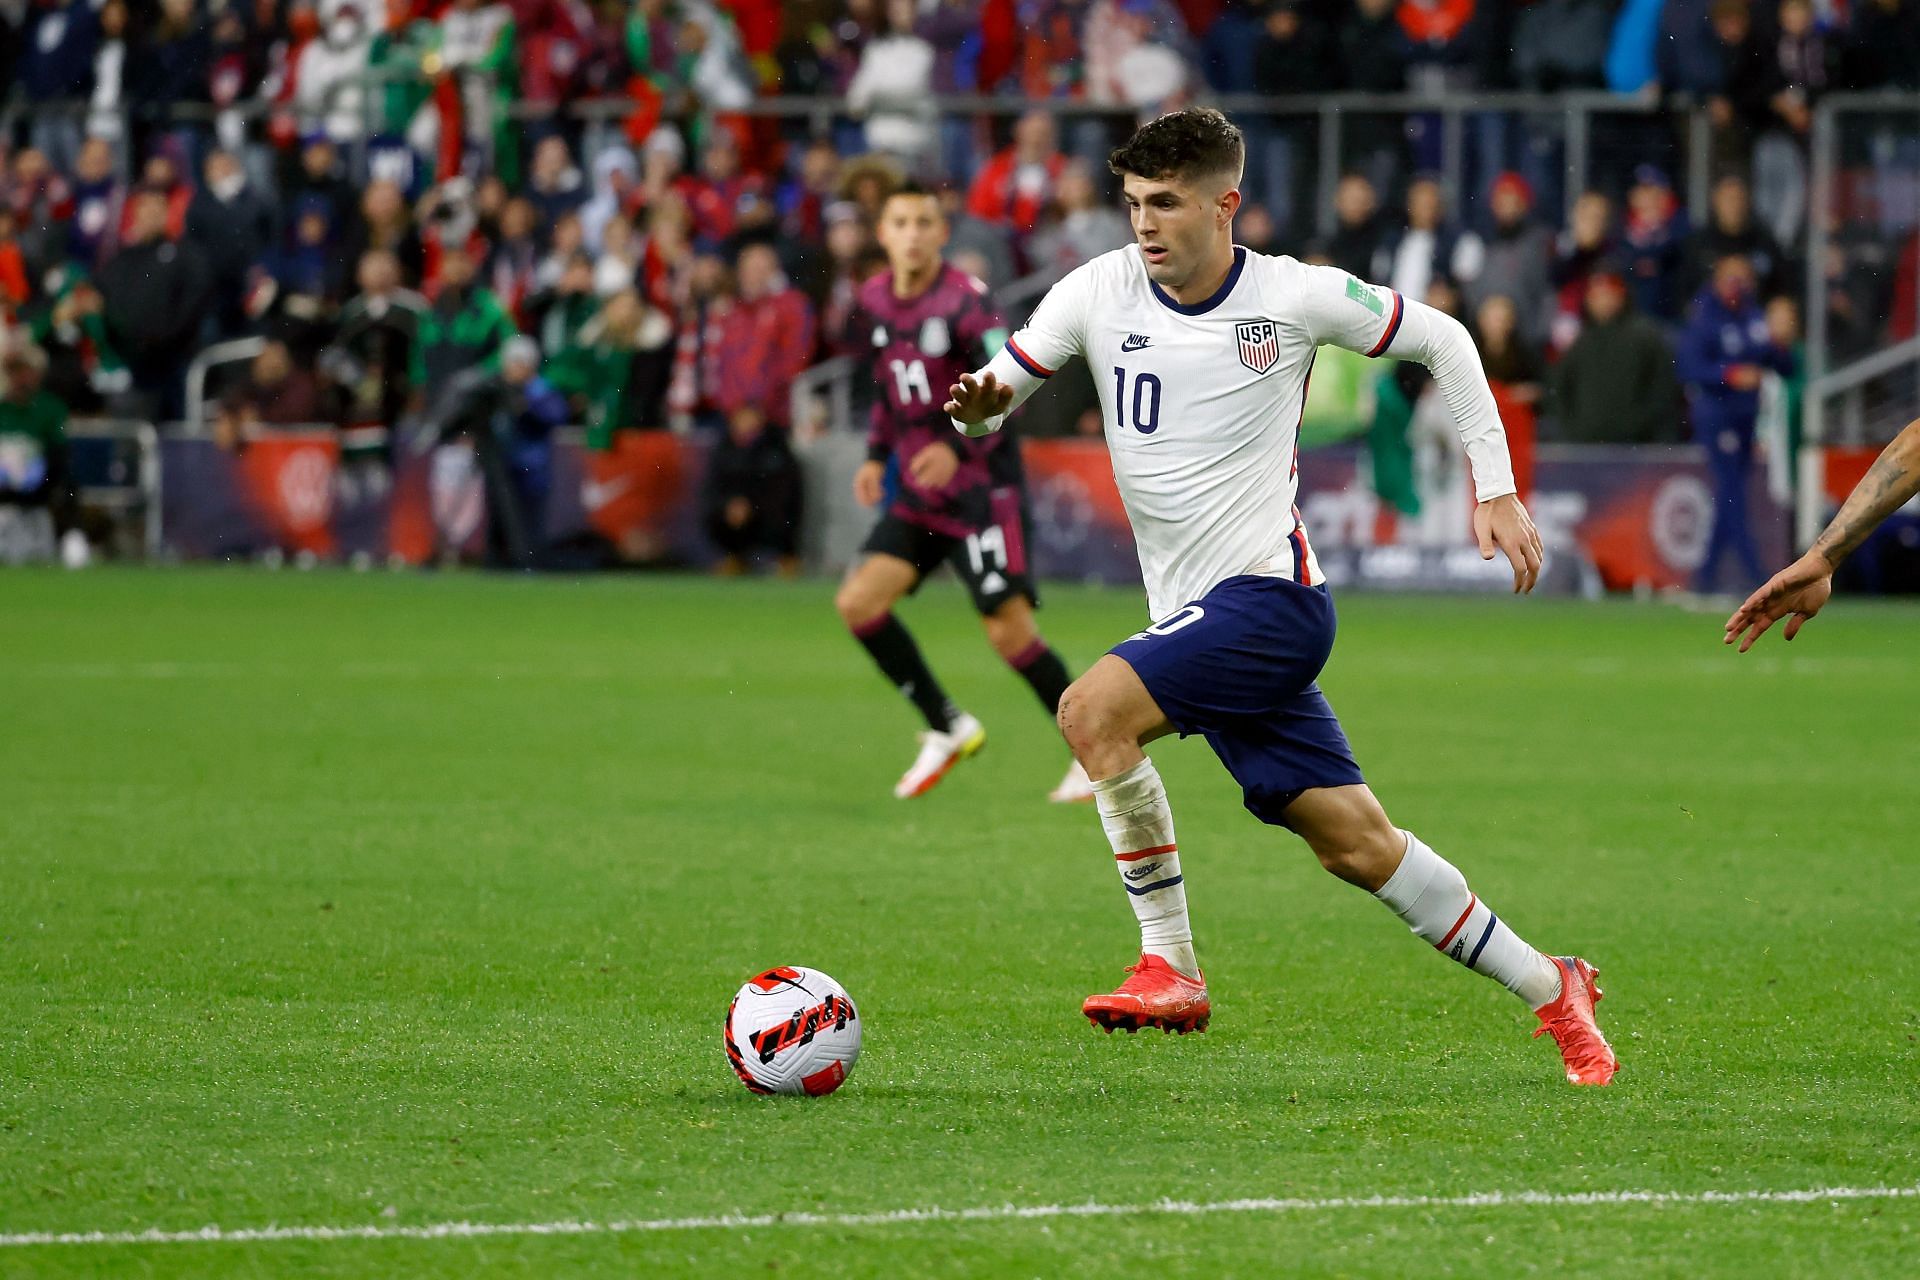 Newcastle United have entered the race to sign Christian Pulisic.